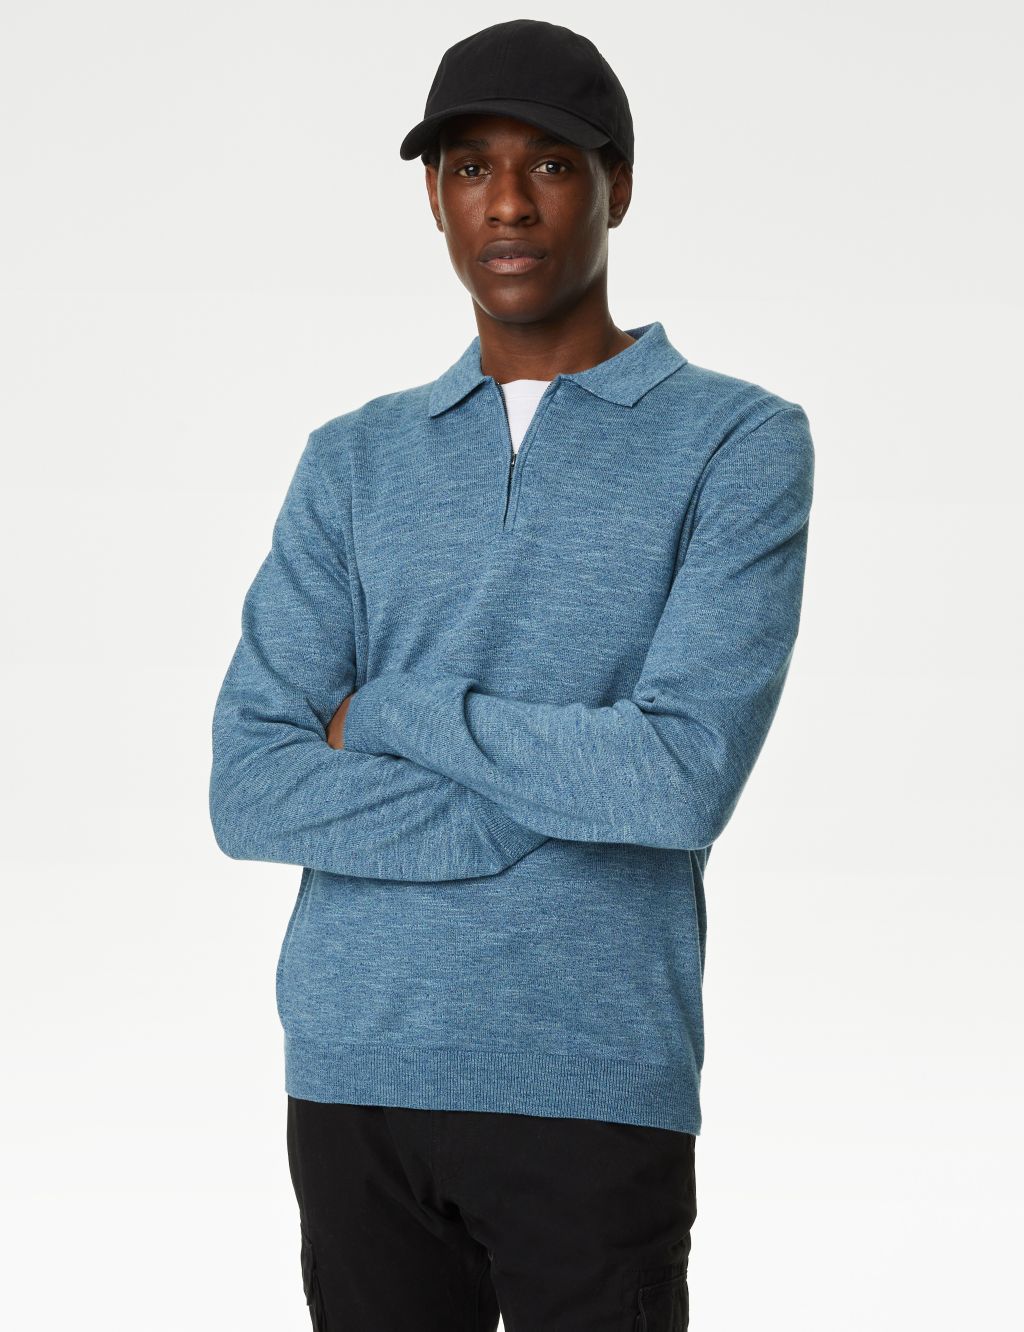 Cotton Rich Zip Up Knitted Polo Shirt image 4